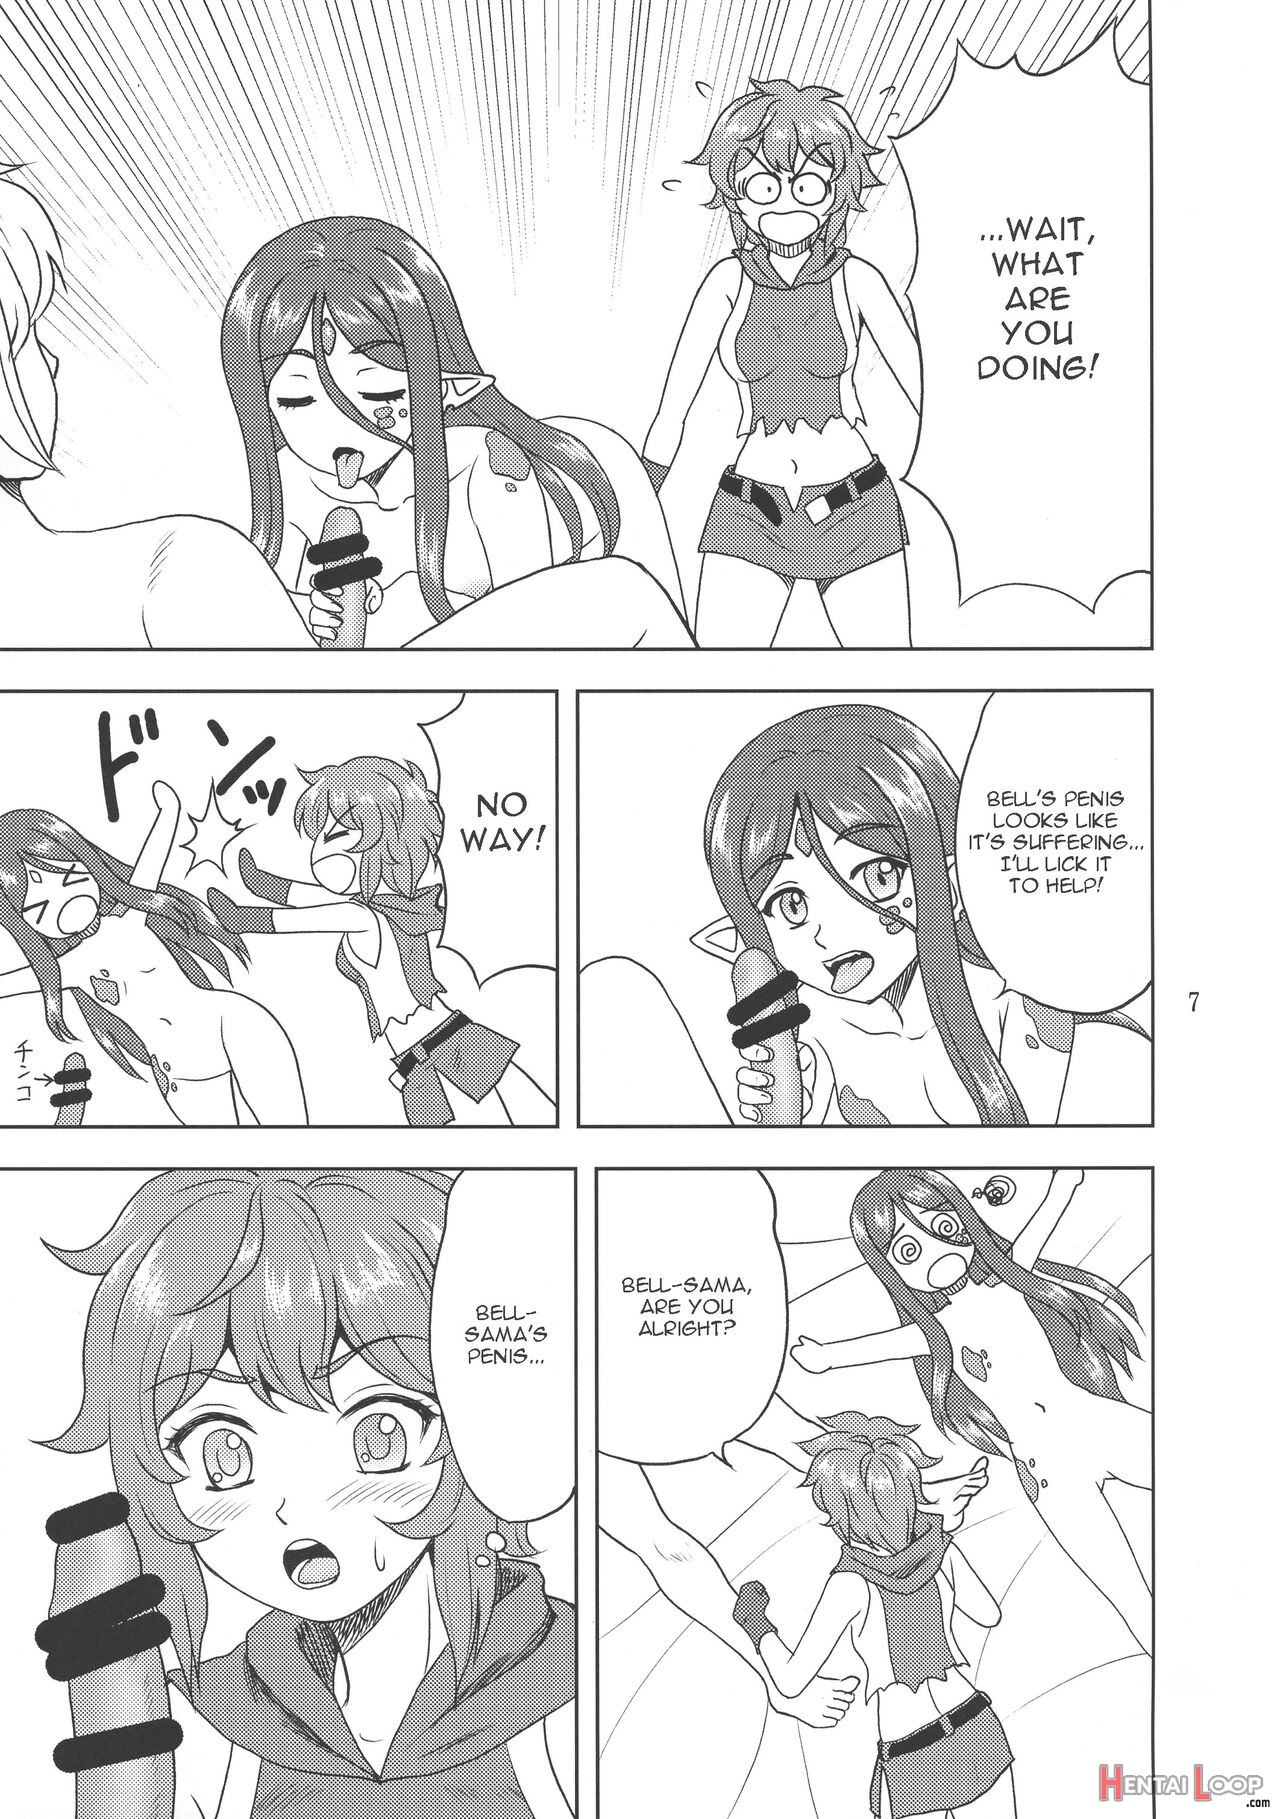 We Love You, Bell-sama! page 8